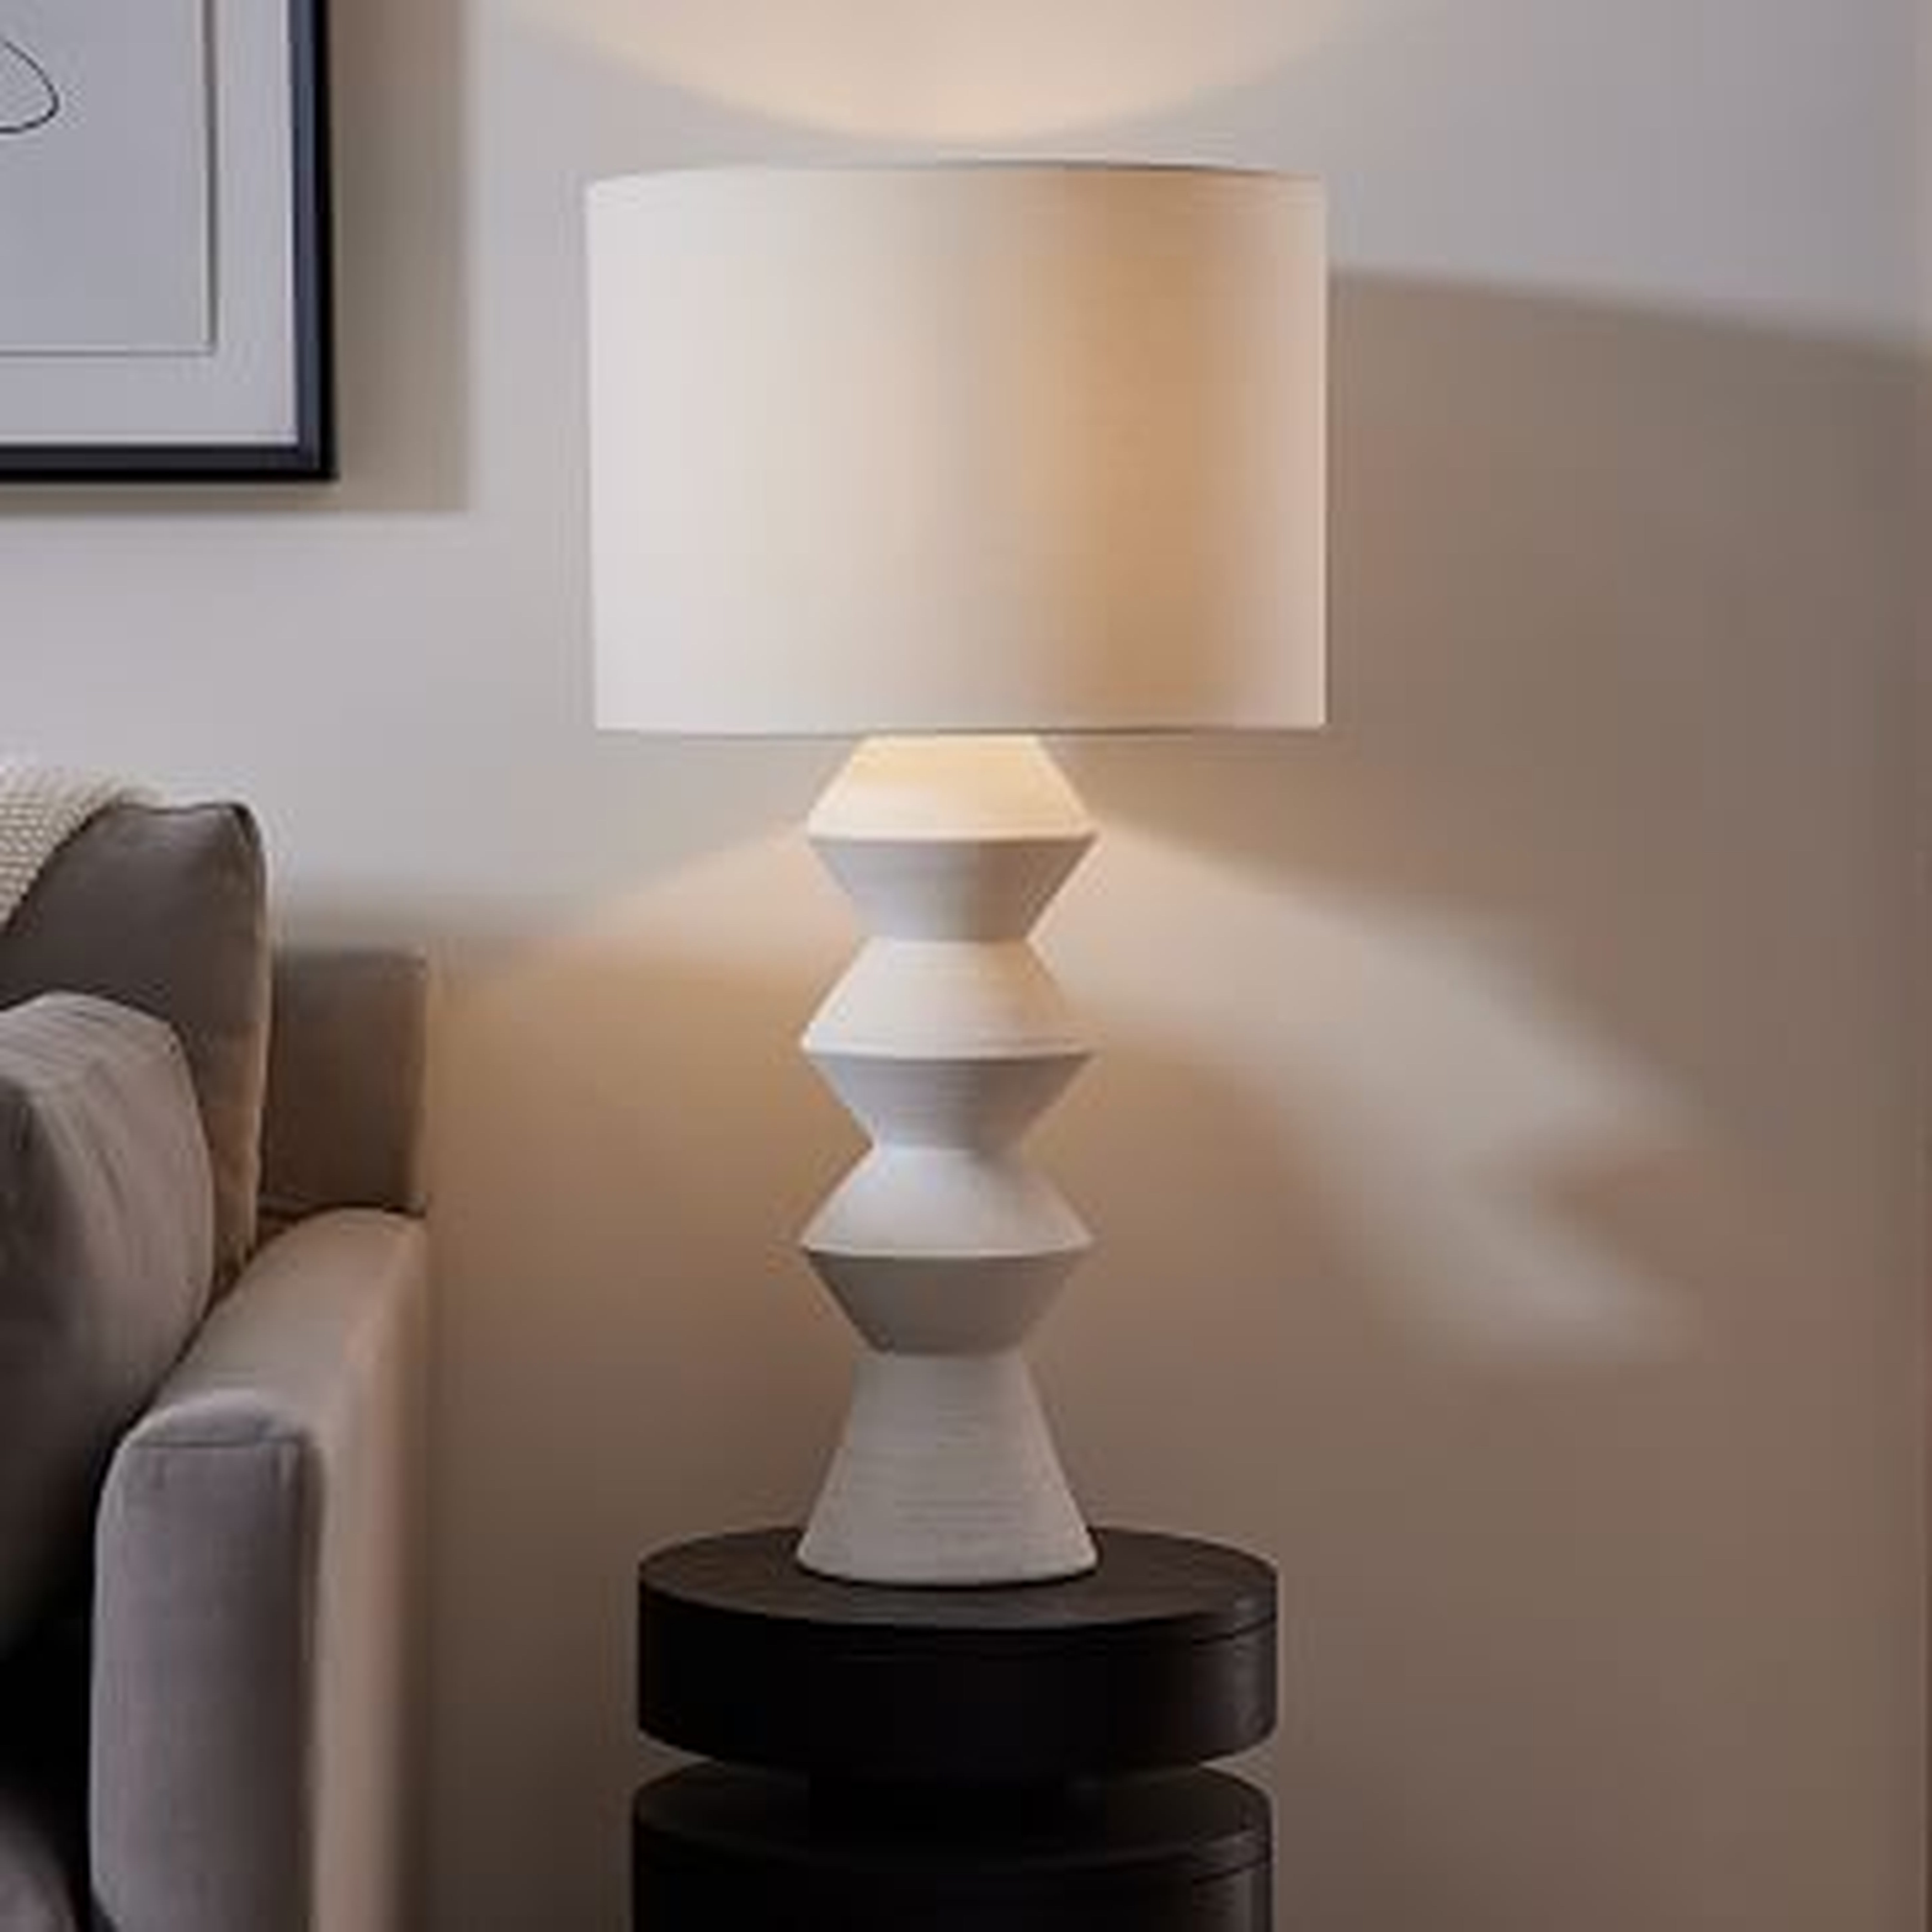 Diego Olivero Ceramic Shapes Table Lamp, 27", 11" Shade, White/White Linen, S/2 - West Elm